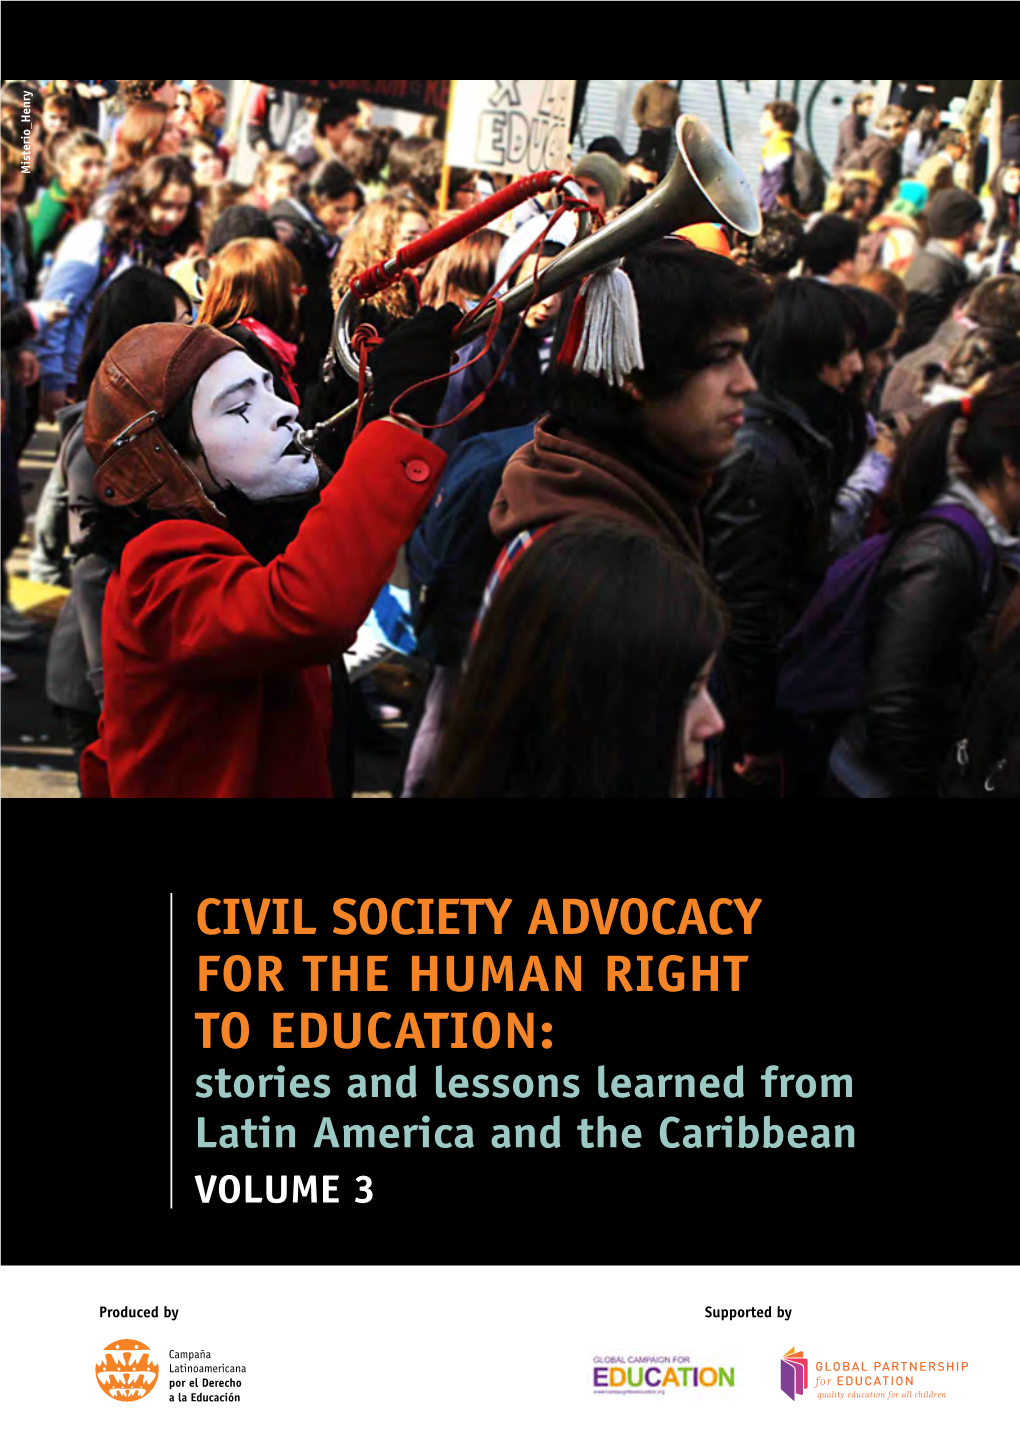 CIVIL SOCIETY ADVOCACY for the HUMAN RIGHT to EDUCATION: Stories and Lessons Learned from Latin America and the Caribbean VOLUME 3